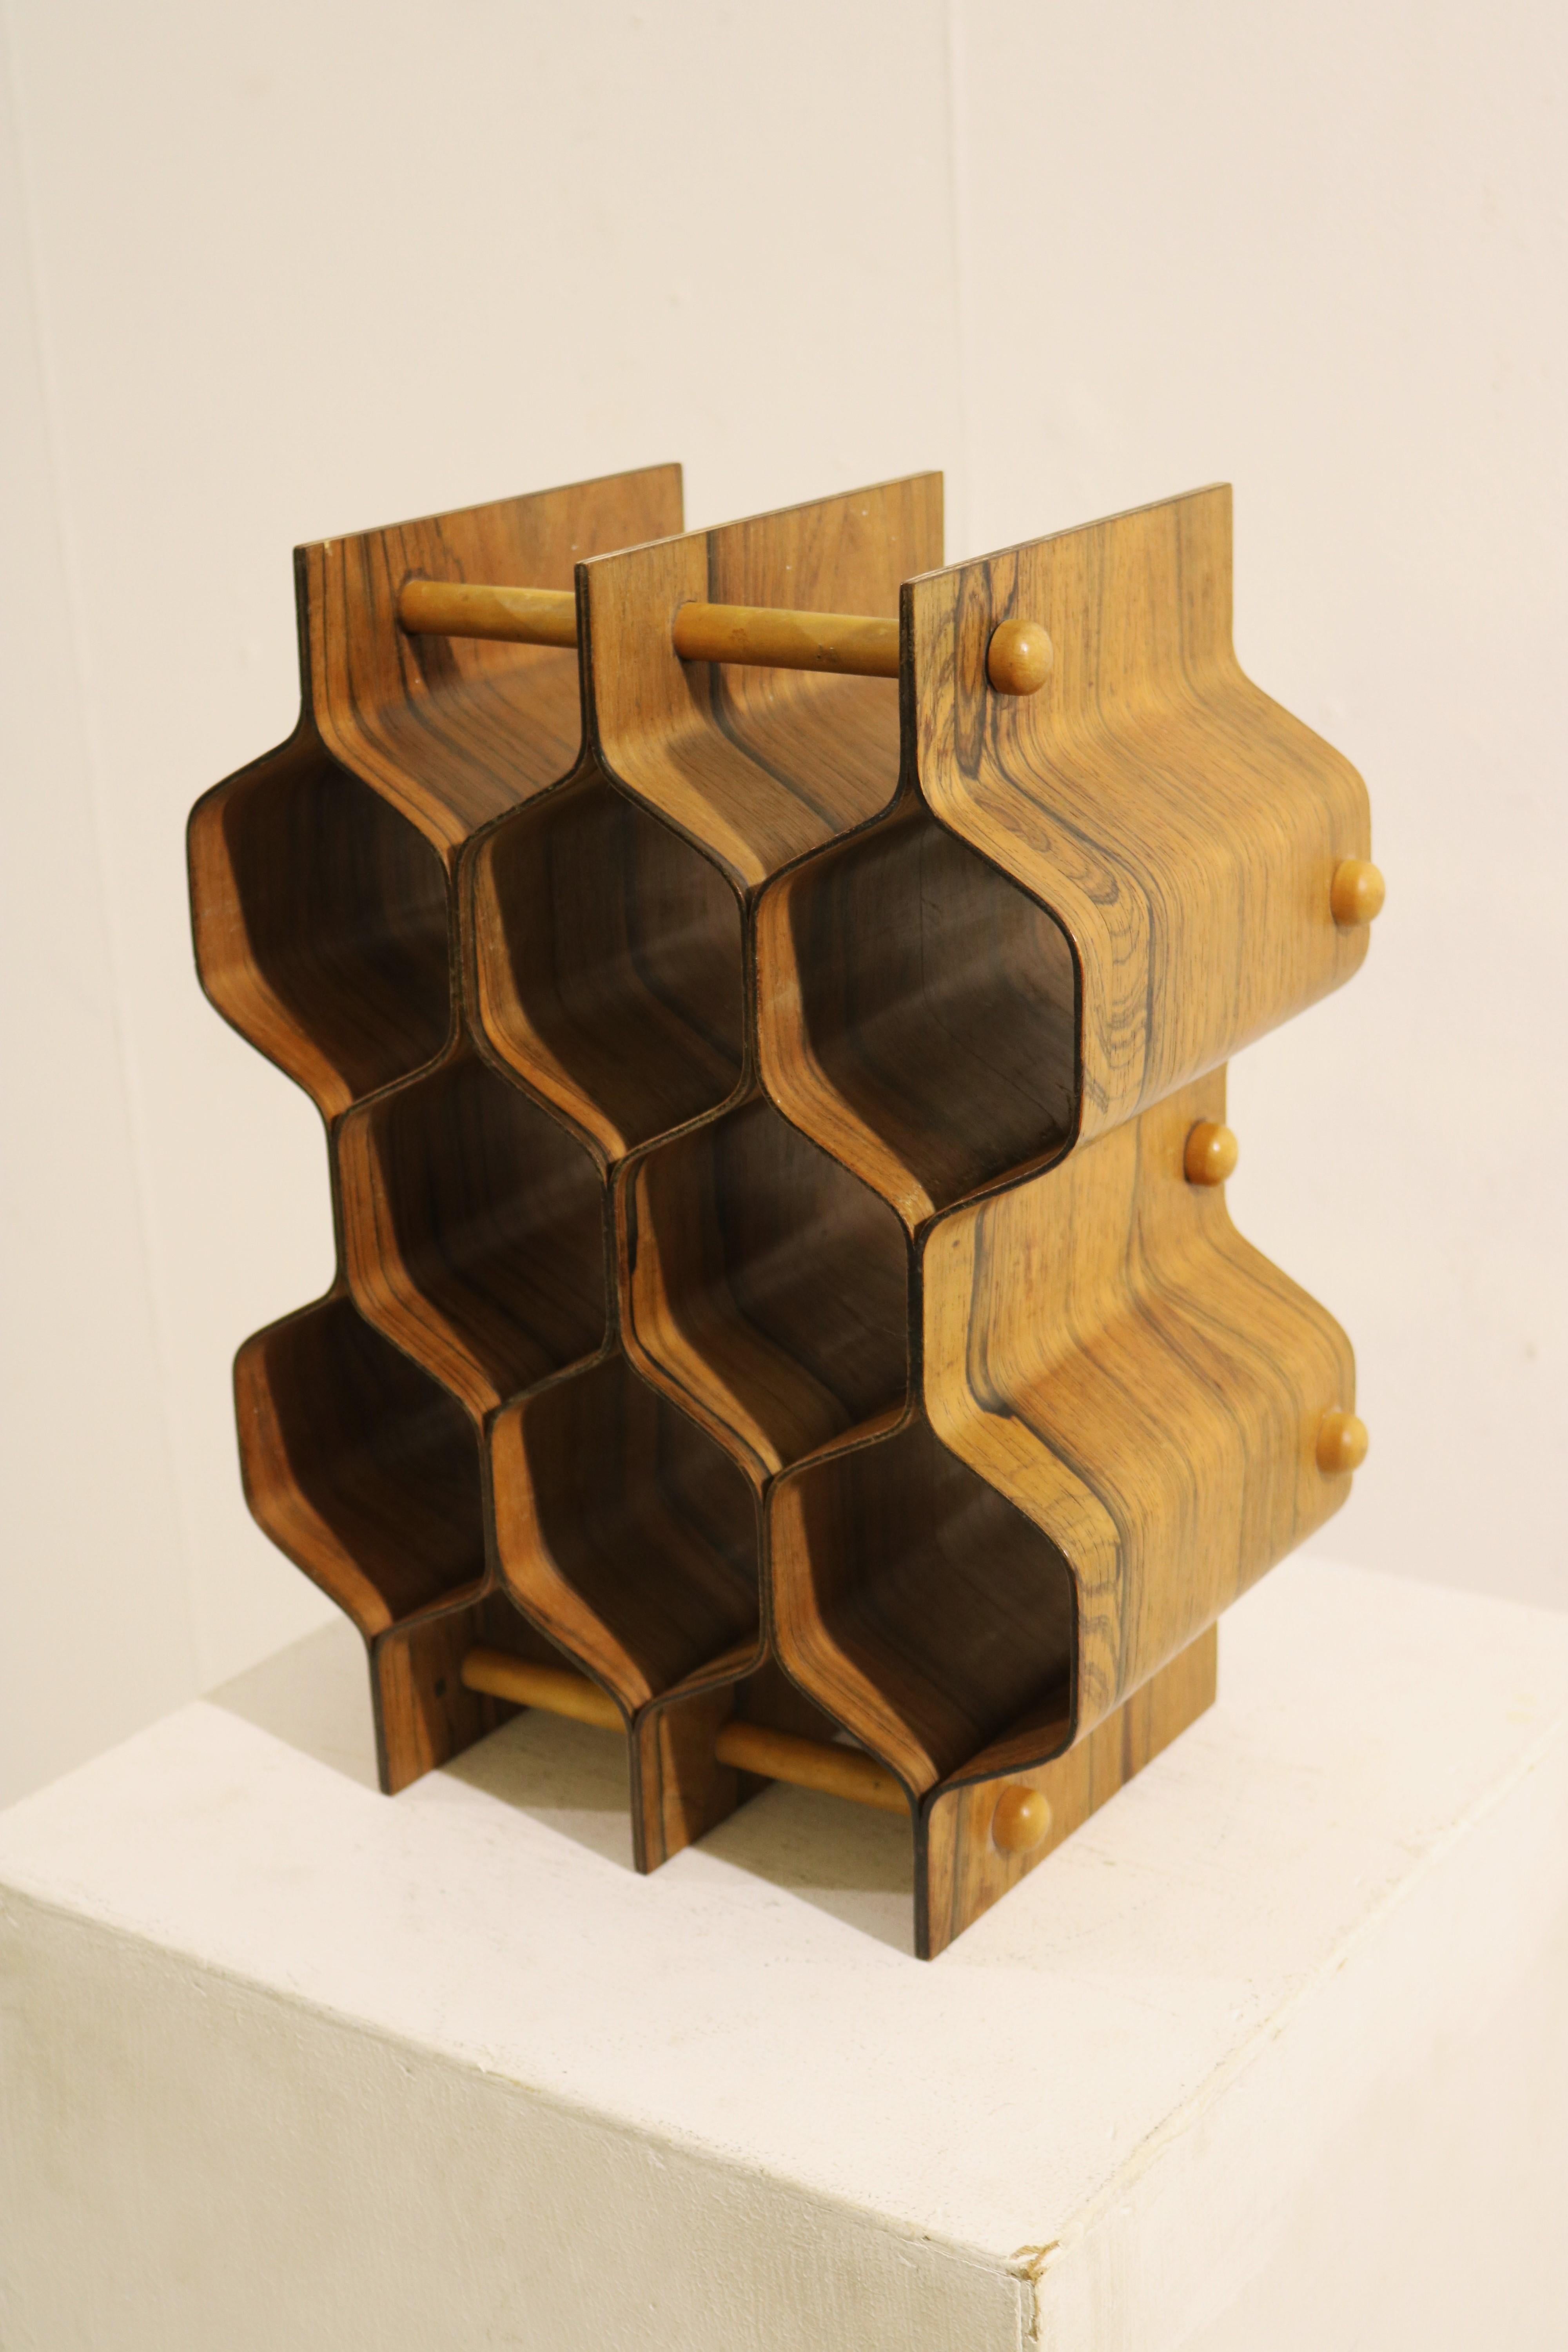 Honeycomb-shaped wine-rack, designed by Torsten Johansson for Ab Formtra in the 1960's. This rare piece is made out of massive wood with gorgeous patterns and a warm colour. It holds space for eight bottles.